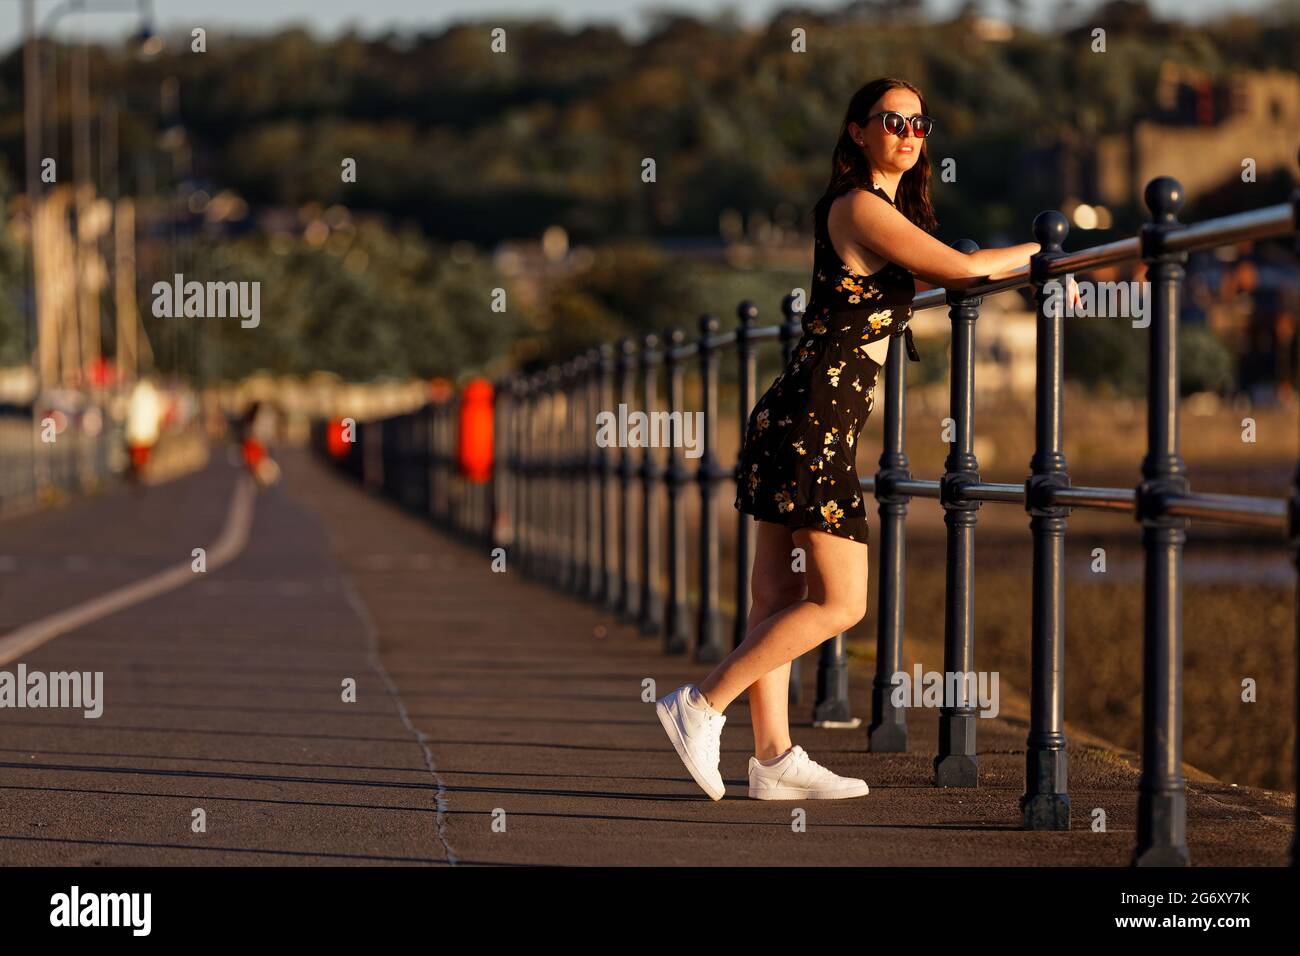 Pictured: Natasha Jenkins takes a stroll during sunrise in Mumbles promenade, near Swansea, Wales, UK. Sunday 13 June 2021 Re: High temperatures and s Stock Photo